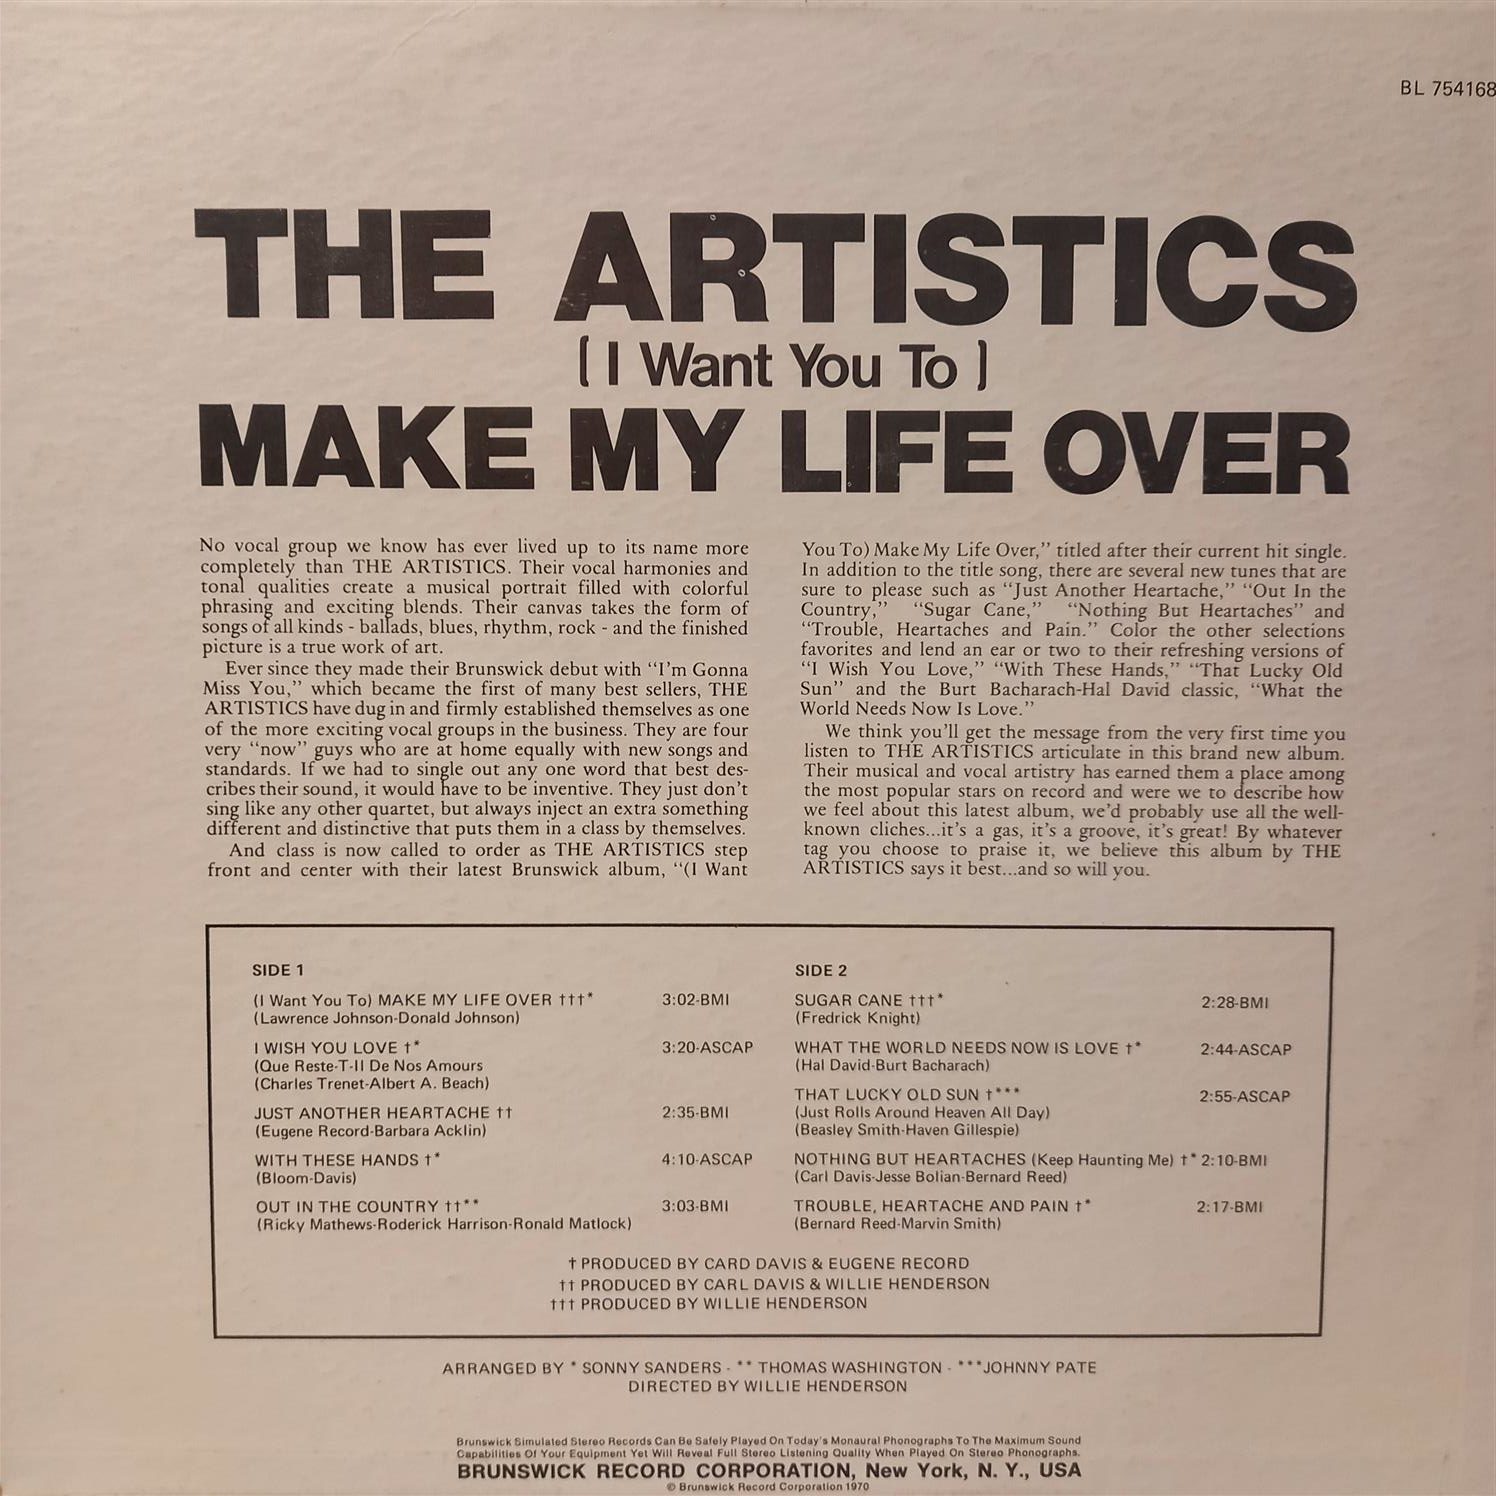 THE ARTISTICS – I WANT YOU TO MAKE MY LIFE OVER ARKA